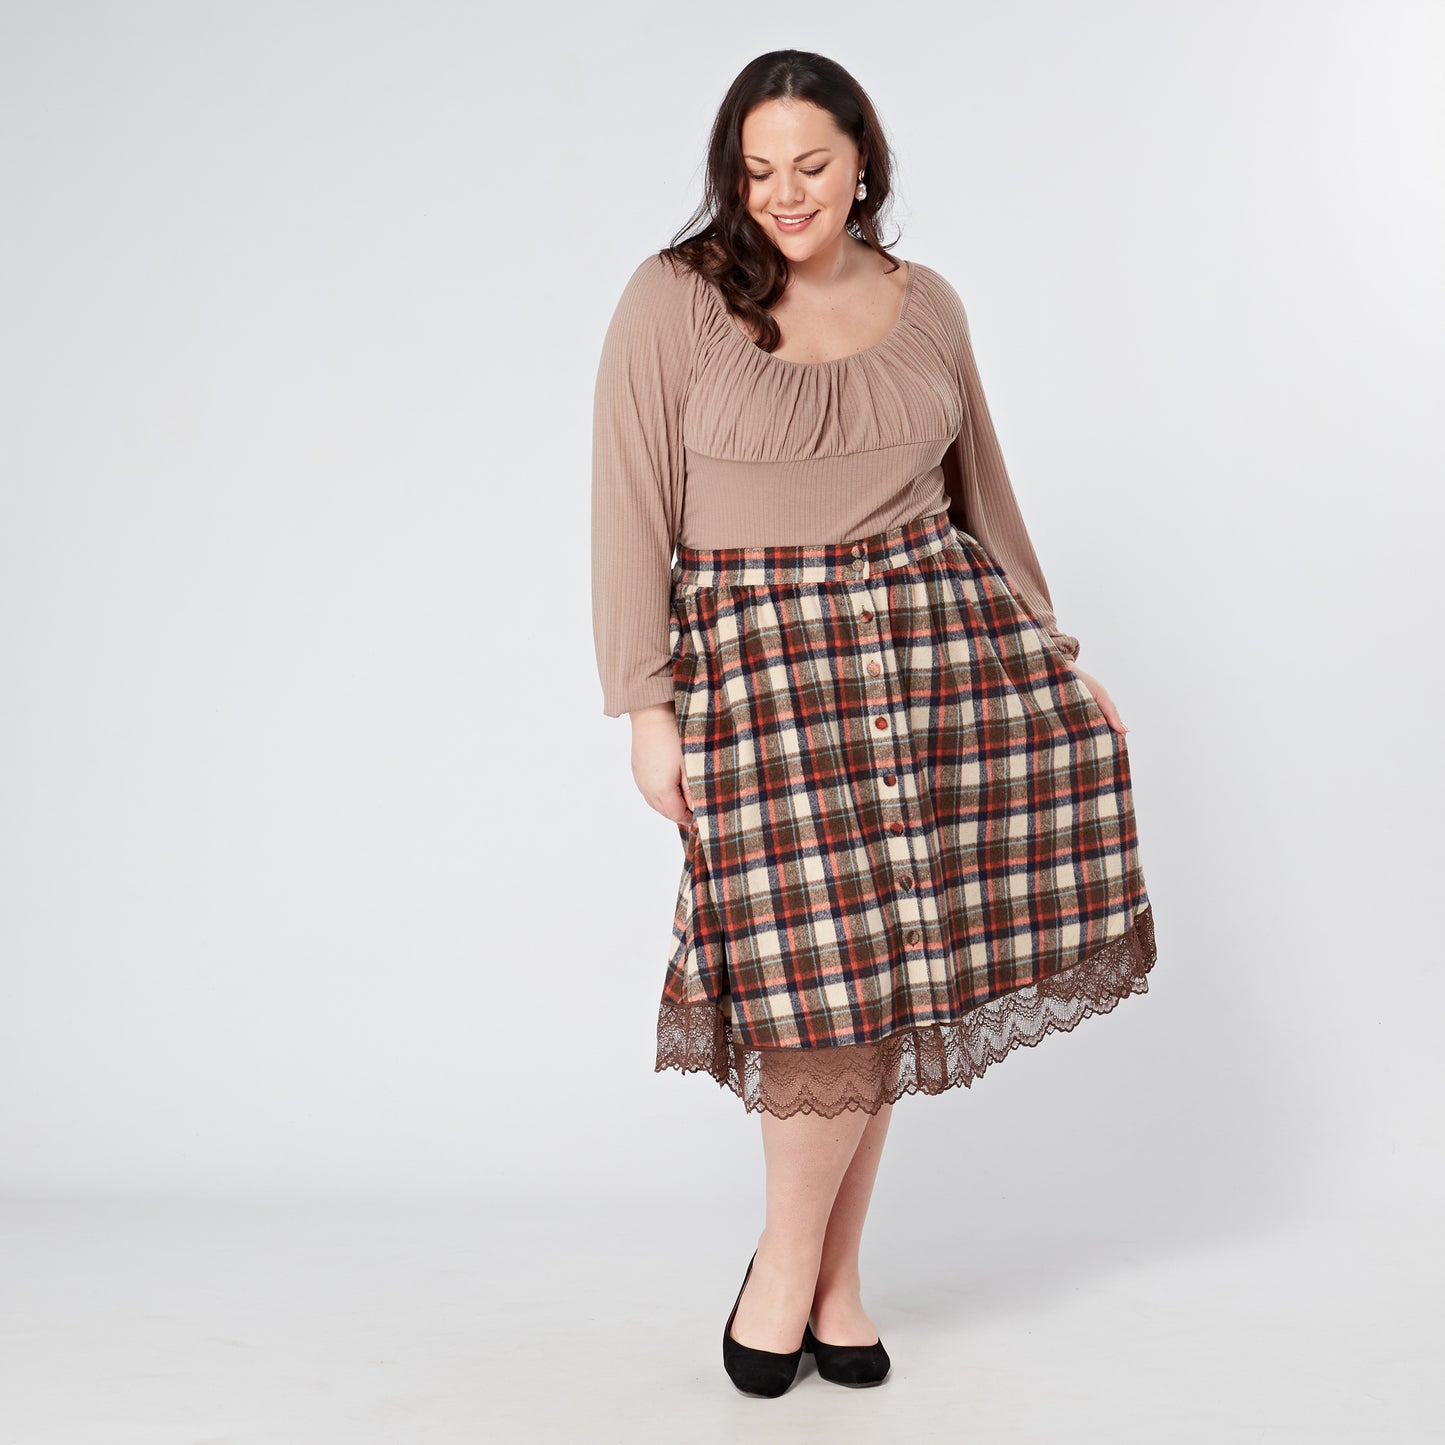 'Clover' Button Through Swing Skirt in Rustic Plaid